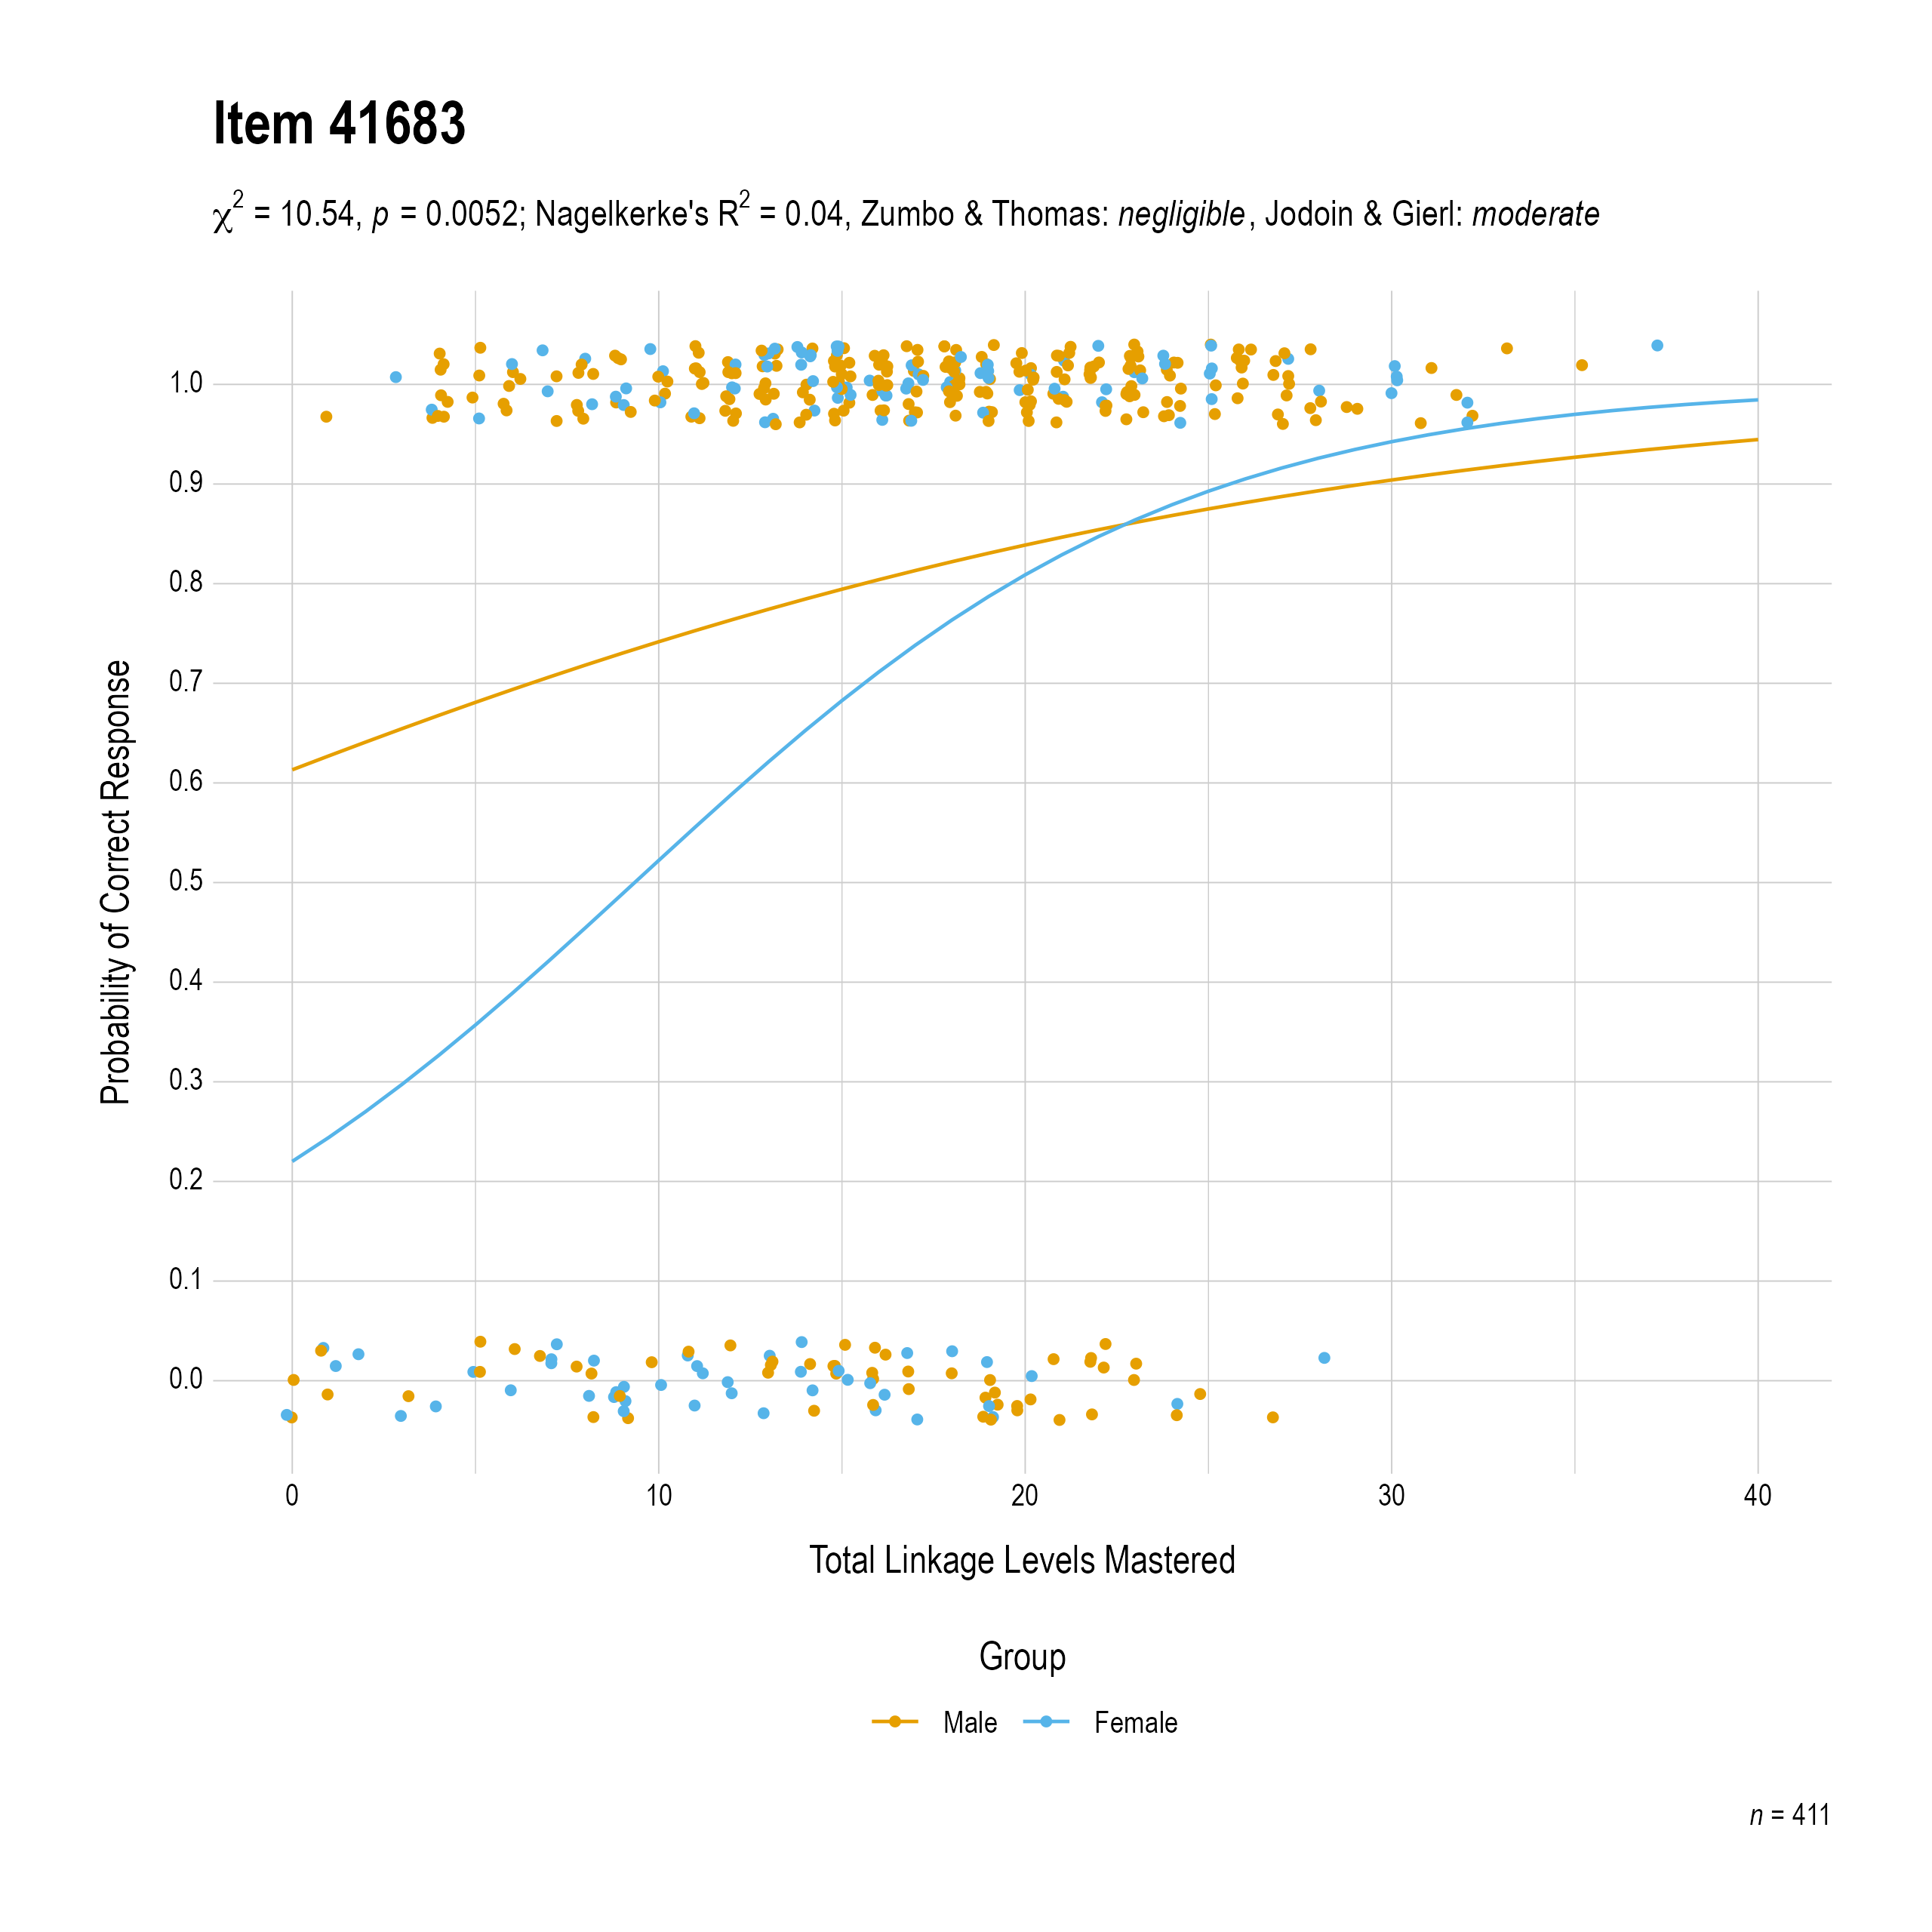 The plot of the combined gender differential item function evidence for Mathematics item 41683. The figure contains points shaded by group. The figure also contains a logistic regression curve for each group. The total linkage levels mastered in is on the x-axis, and the probability of a correct response is on the y-axis.